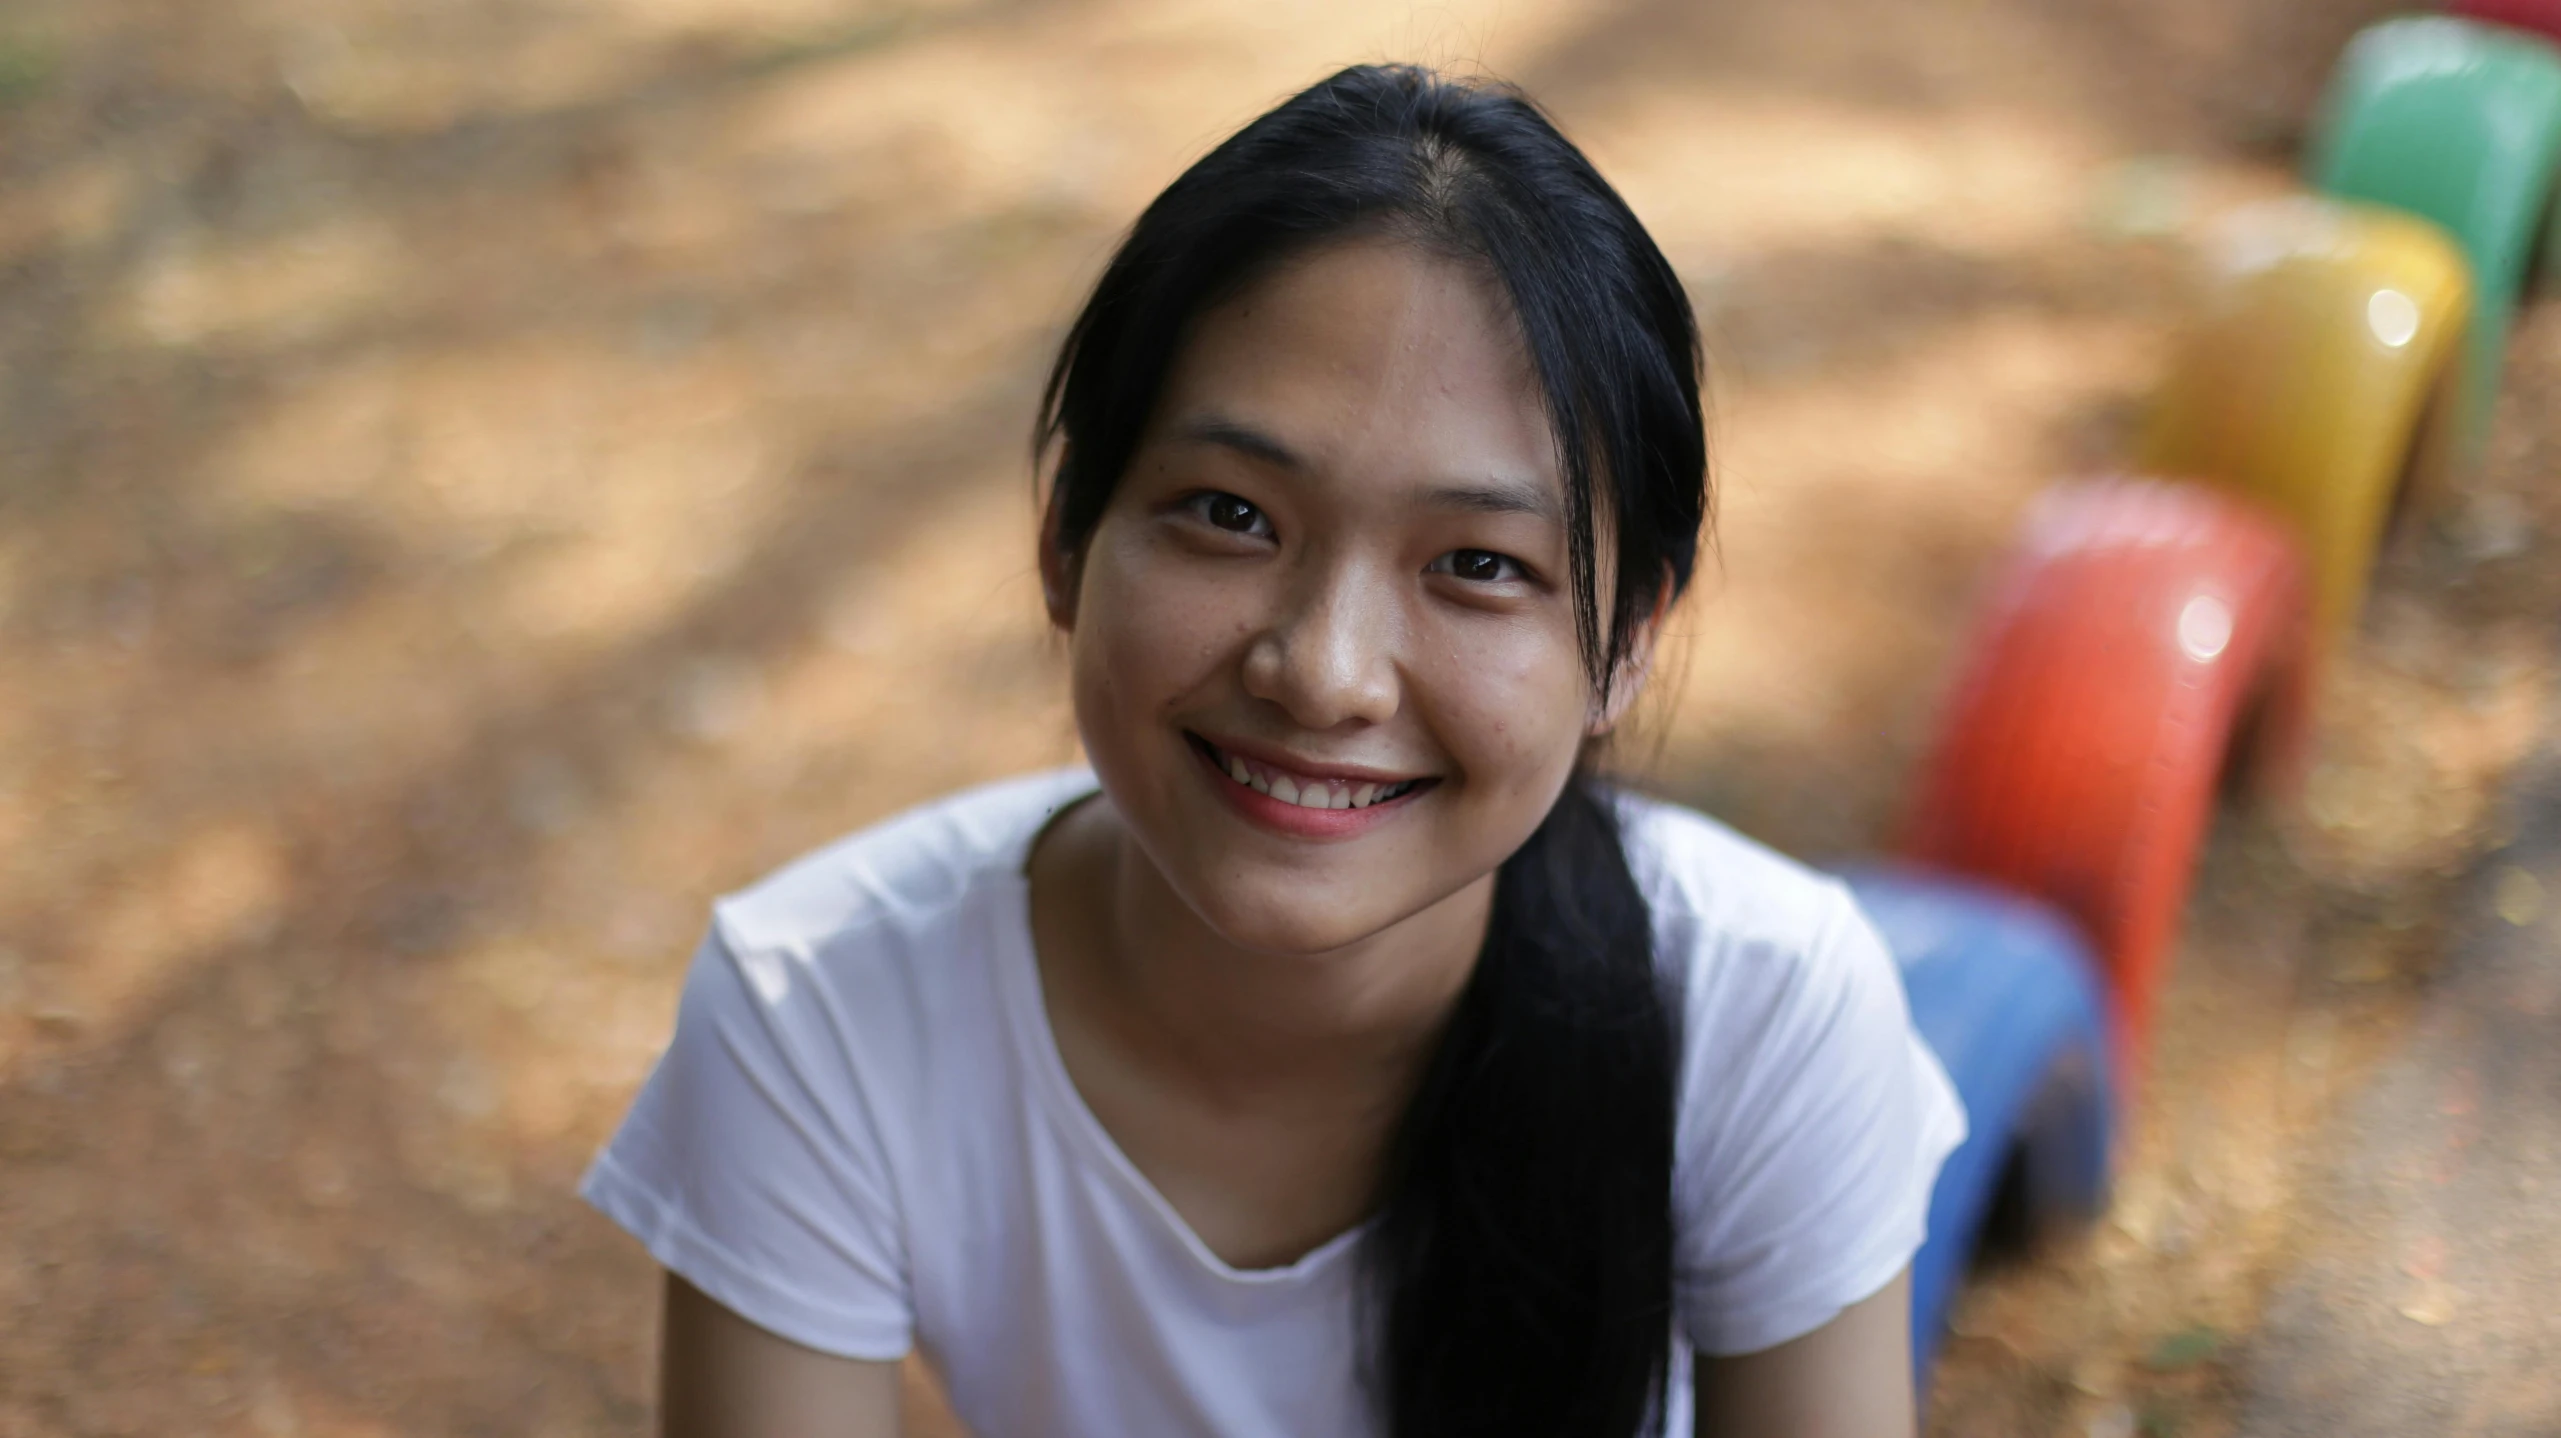 a woman with long black hair sitting on a bench, smiling into the camera, malaysian, portrait image, pictured from the shoulders up